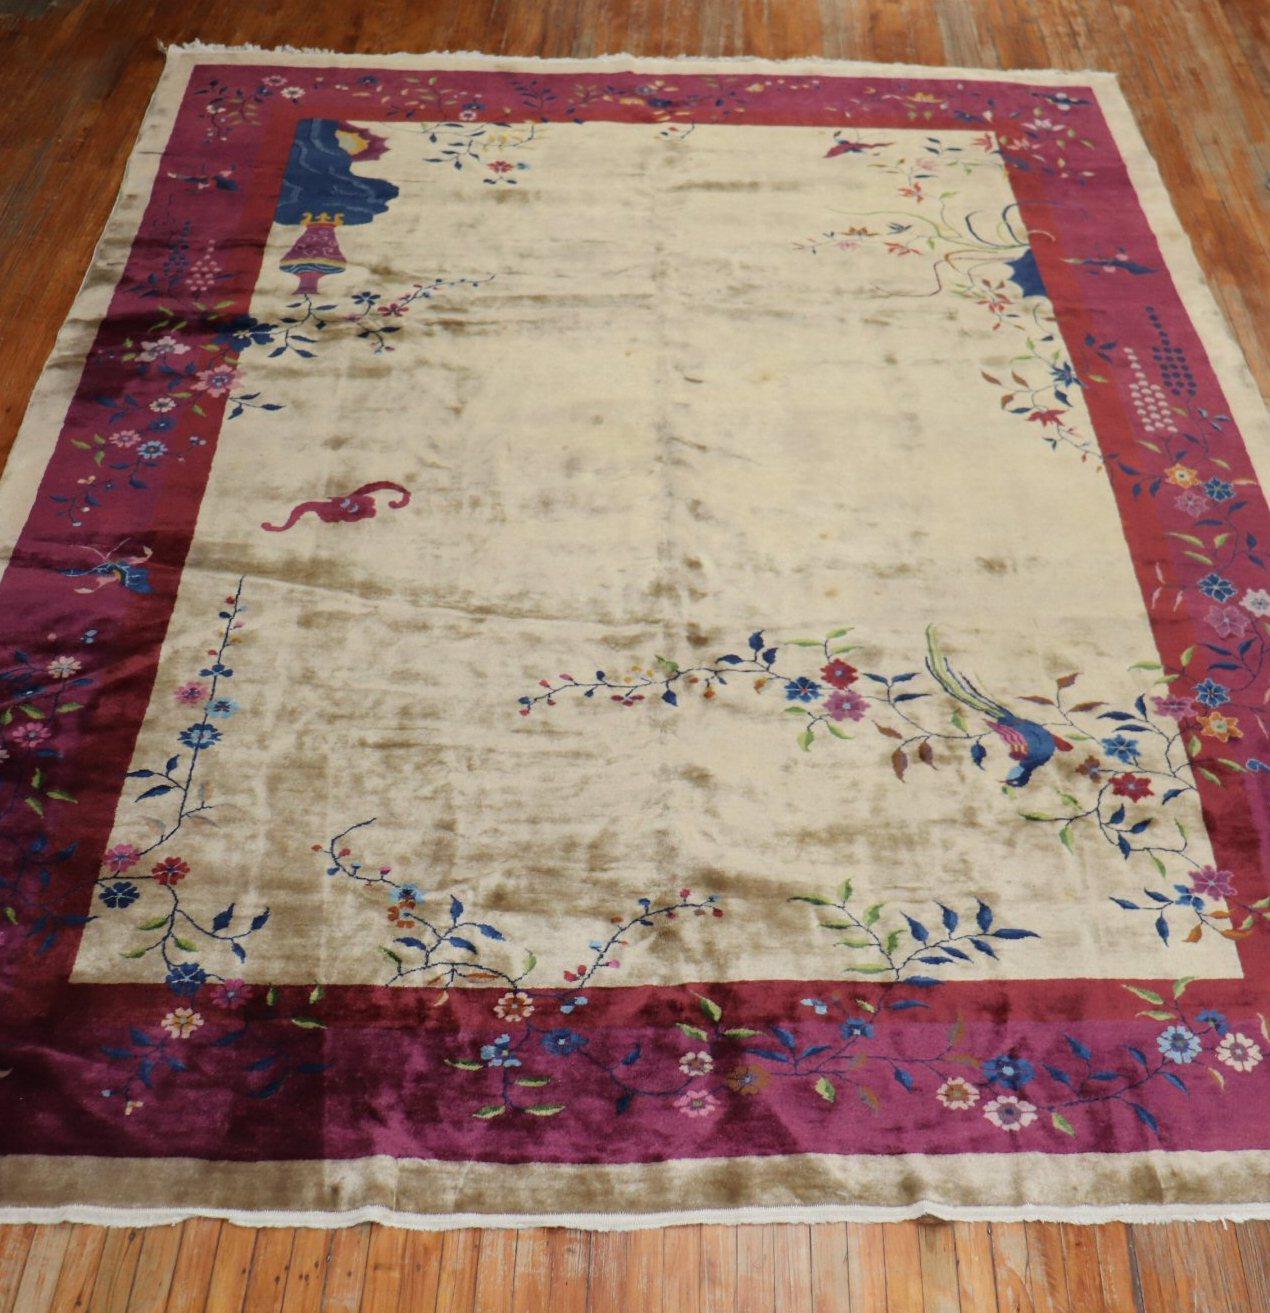 An authentic mid-20th century Chinese Art Deco with an enchanting floral motif in predominant wine, navy blue accents on a beige ground. The wool has a silky feel to it
Room size formats are usually found in the 8 x 10, 9 x 12 size range, this one